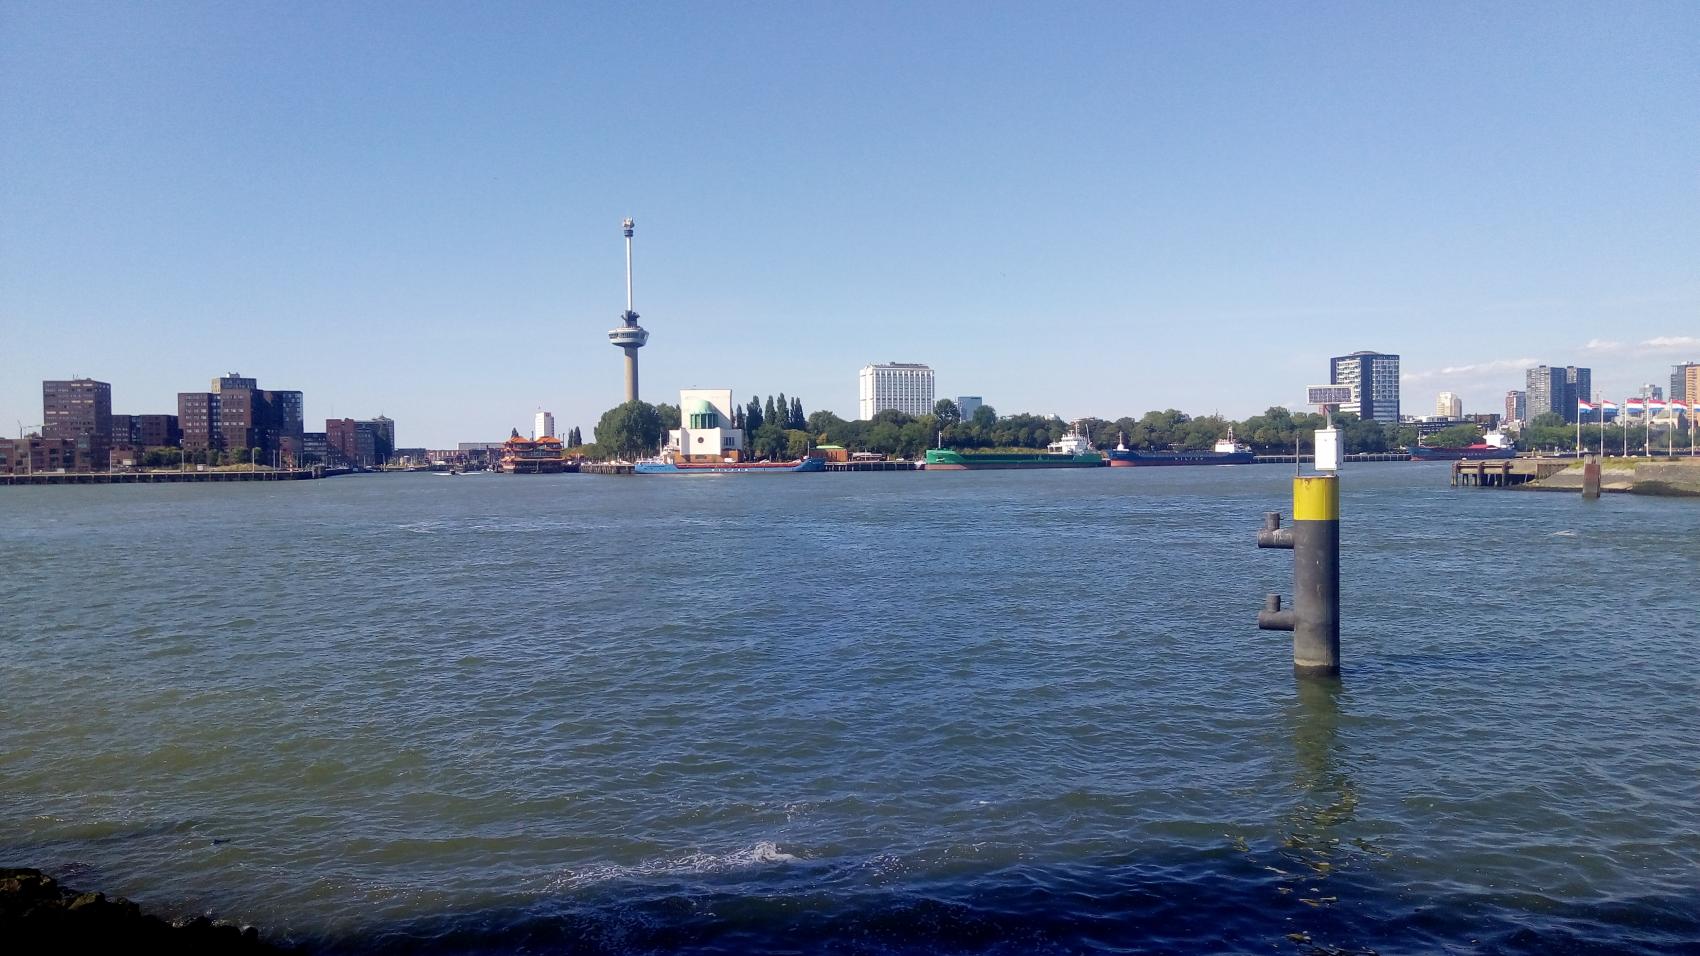 A view across Maas at the tunnel location. Low white building in the centre of the picture contains the exit on the other side.